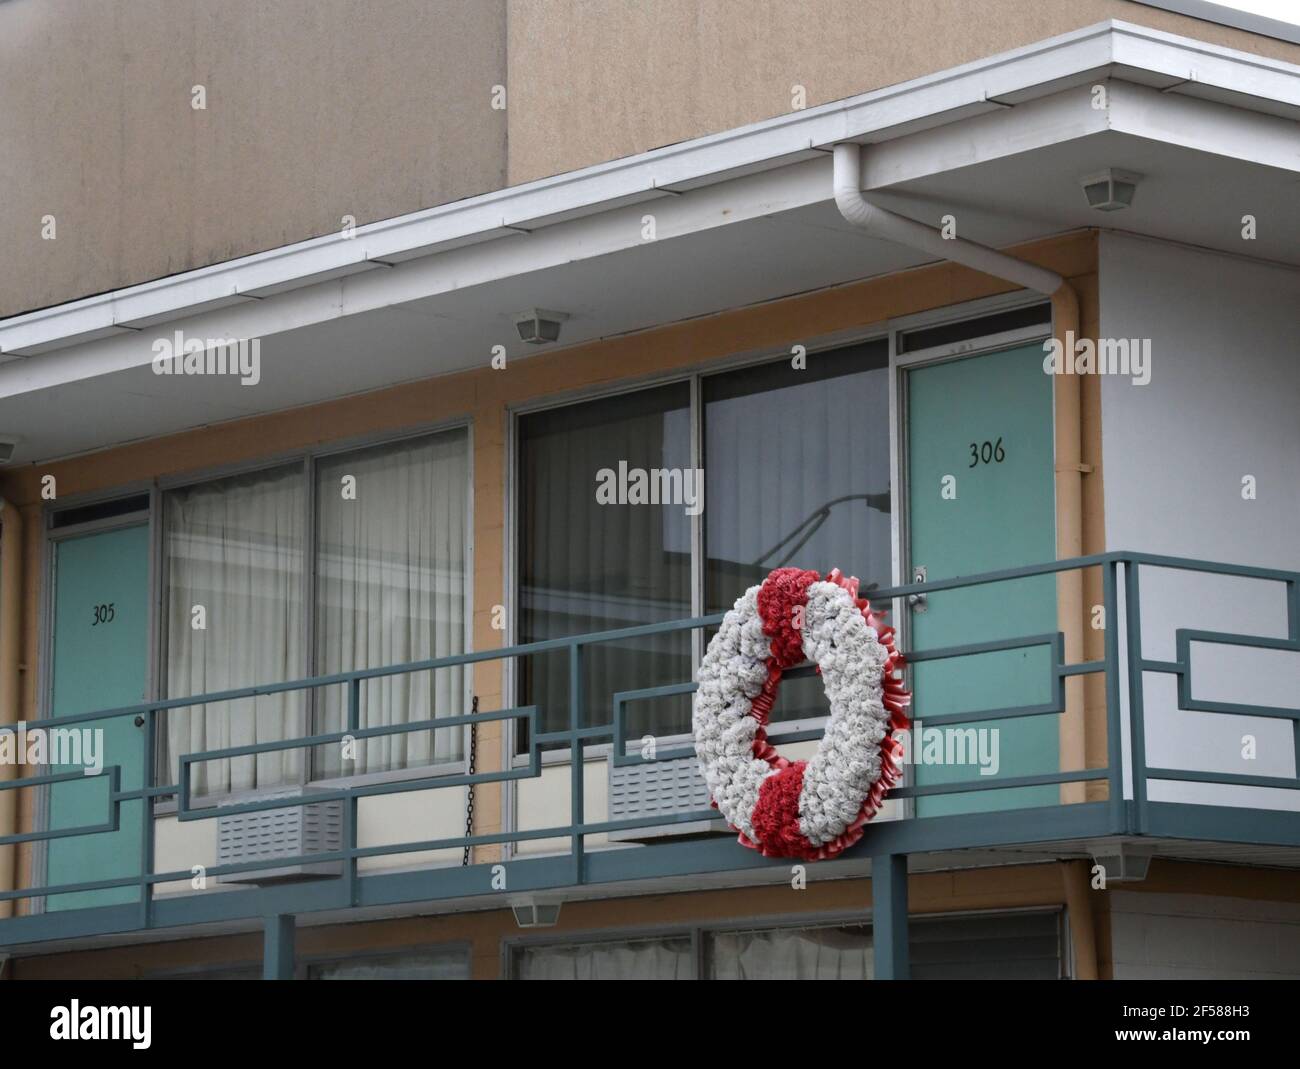 Memphis, Tennessee, USA. 17th Mar, 2021. A wreath marks the spot where Dr. Martin Luther King Jr. was assassinated at the Lorraine Motel in Memphis, Tennessee on April 4, 1968, The scene was photographed March 17, 2021. The National Civil Rights Museum has been built into the motel. (Credit Image: © Mark HertzbergZUMA Wire) Stock Photo